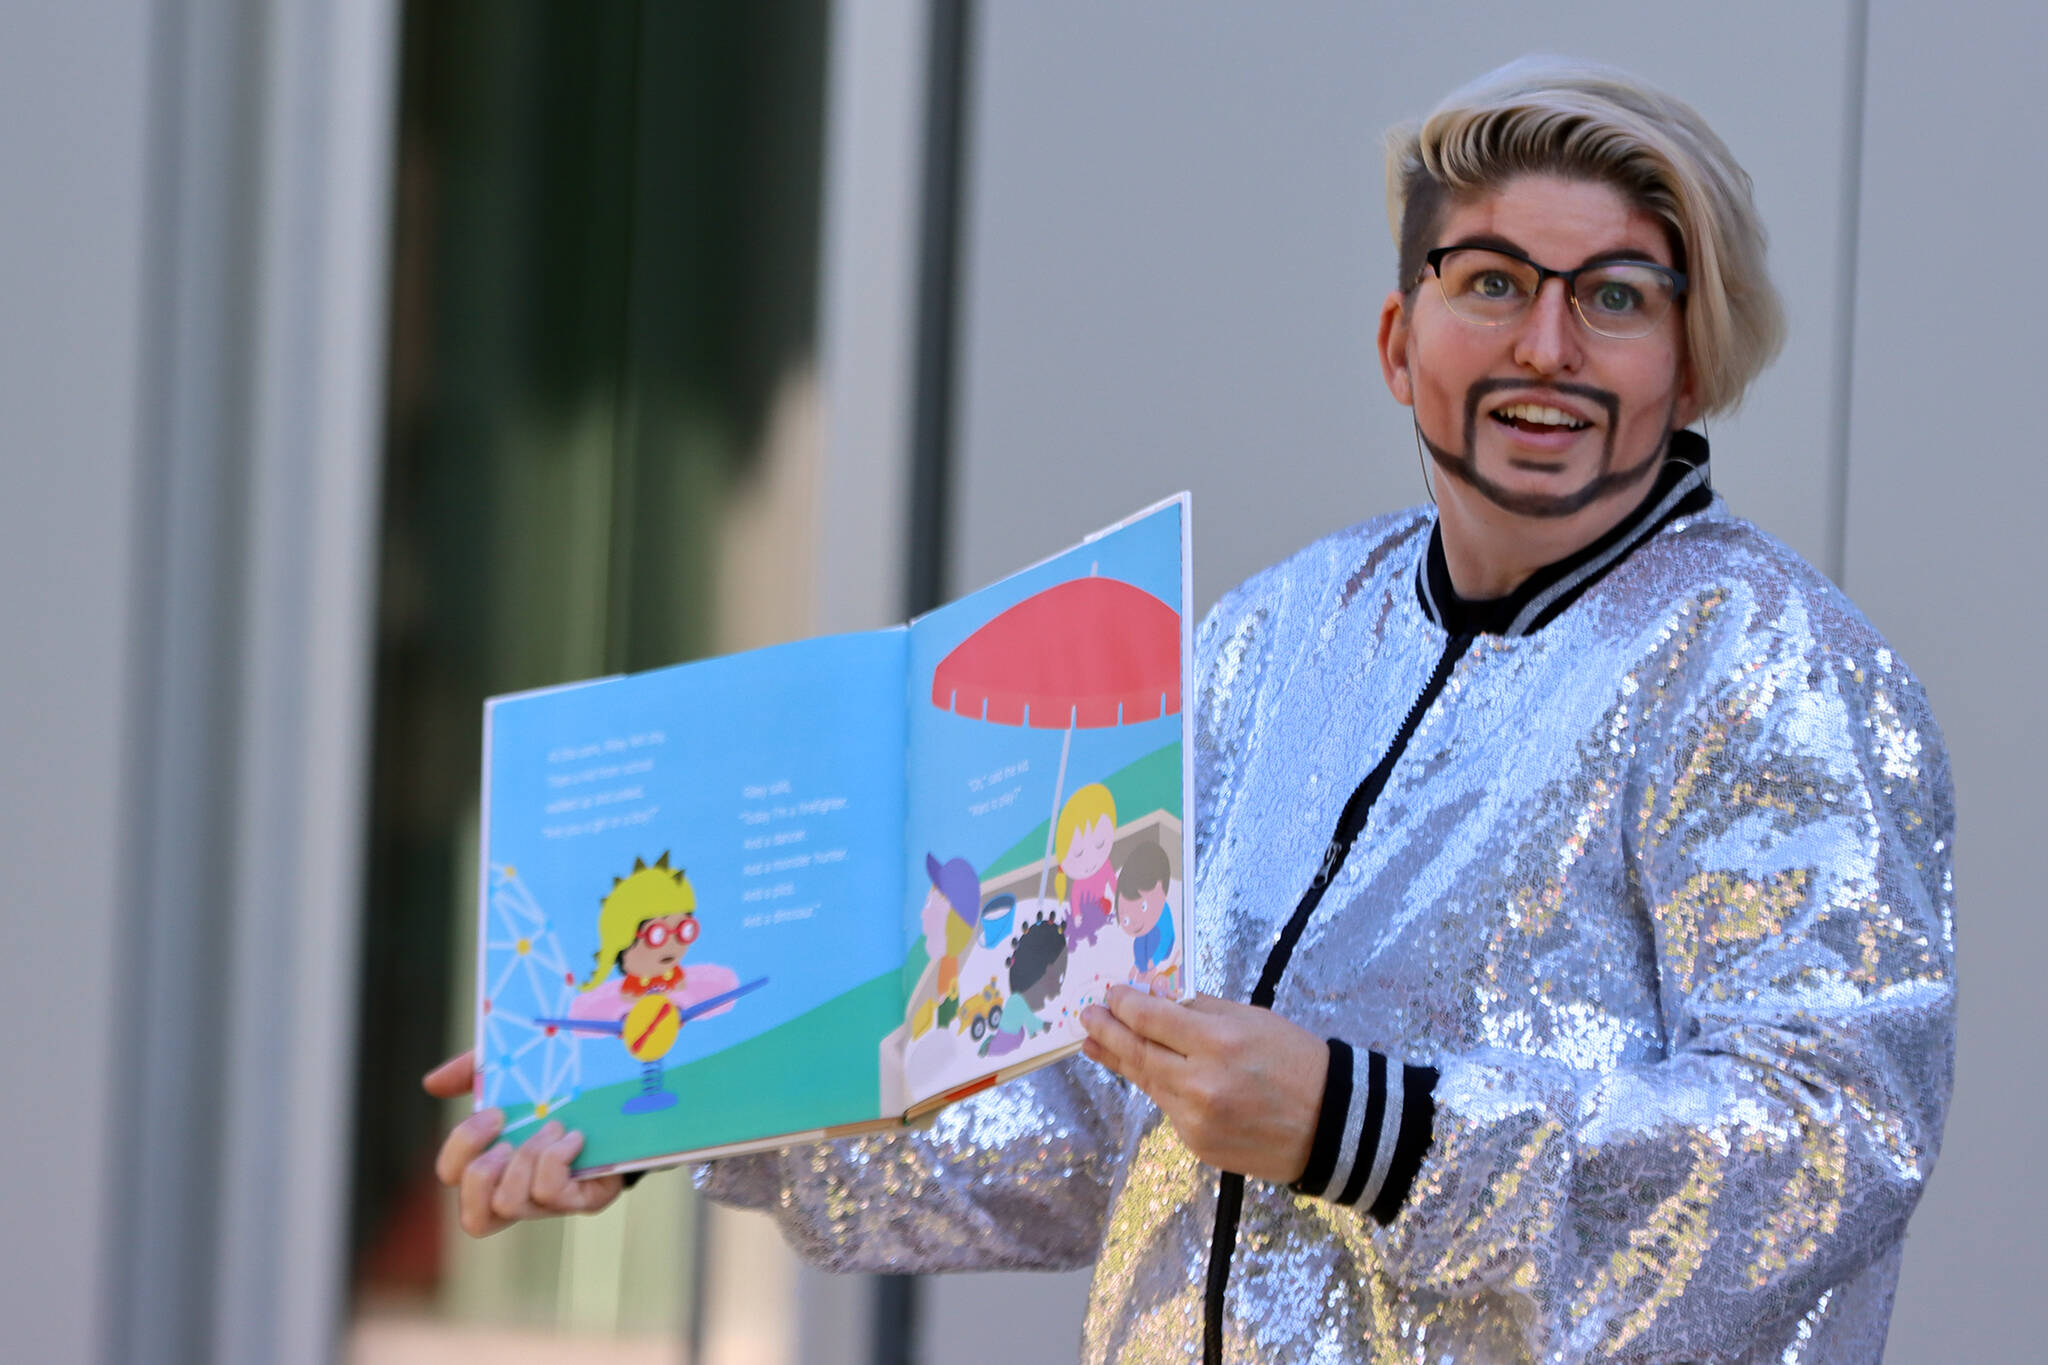 Drag king Max Stout reads a book to families during Drag Storytime at the Mendenhall Valley Public Library.(Ben Hohenstatt / Juneau Empire)